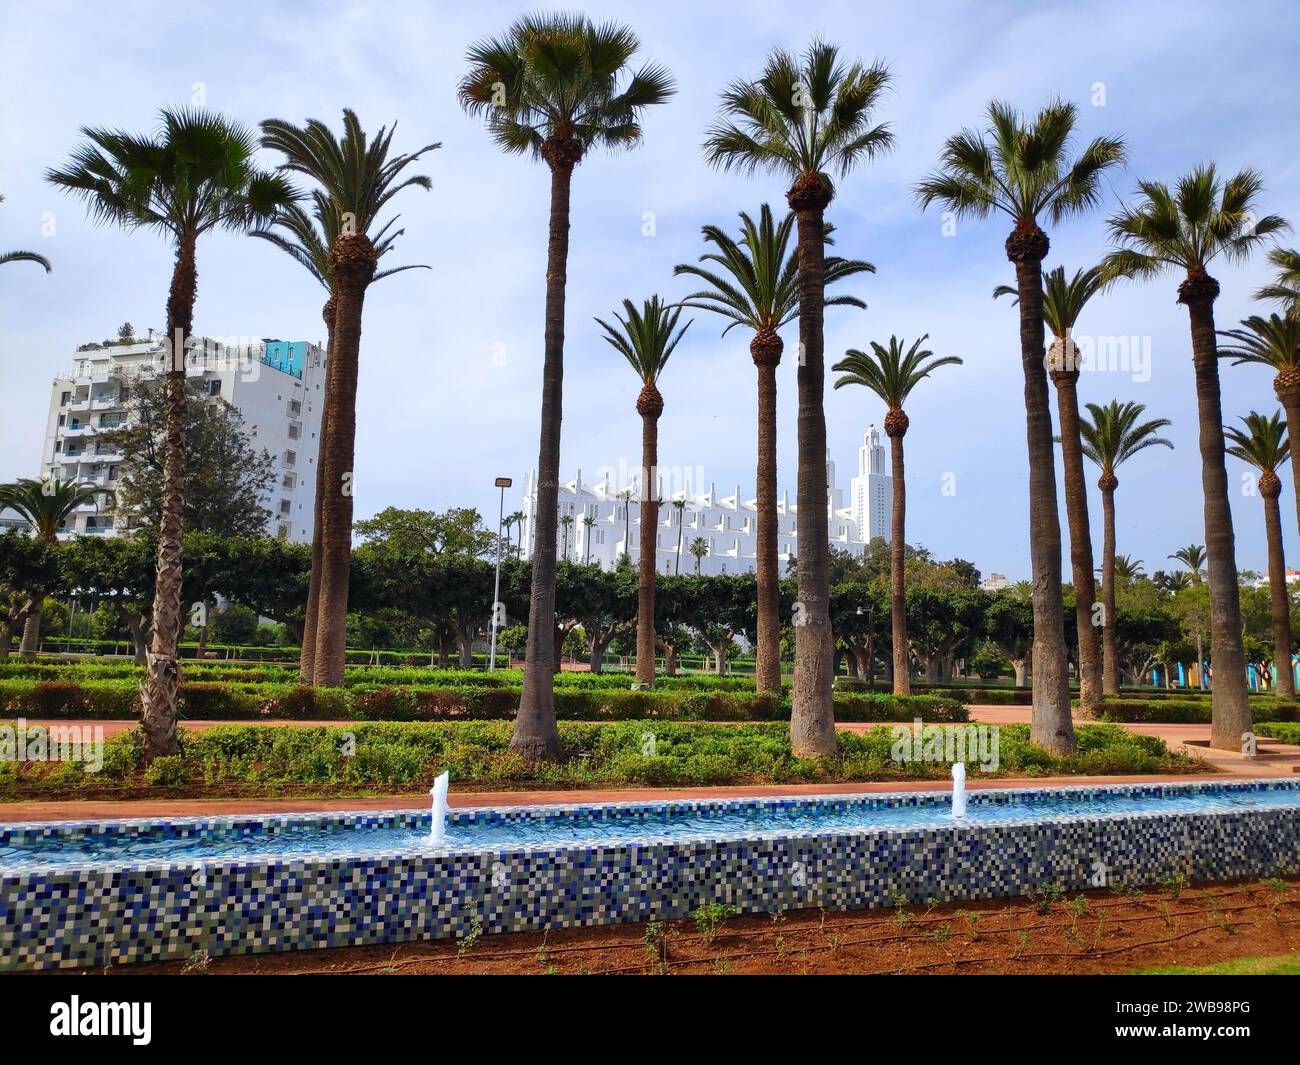 Arab League park in Casablanca, Morocco. Palm trees and fountains. Stock Photo